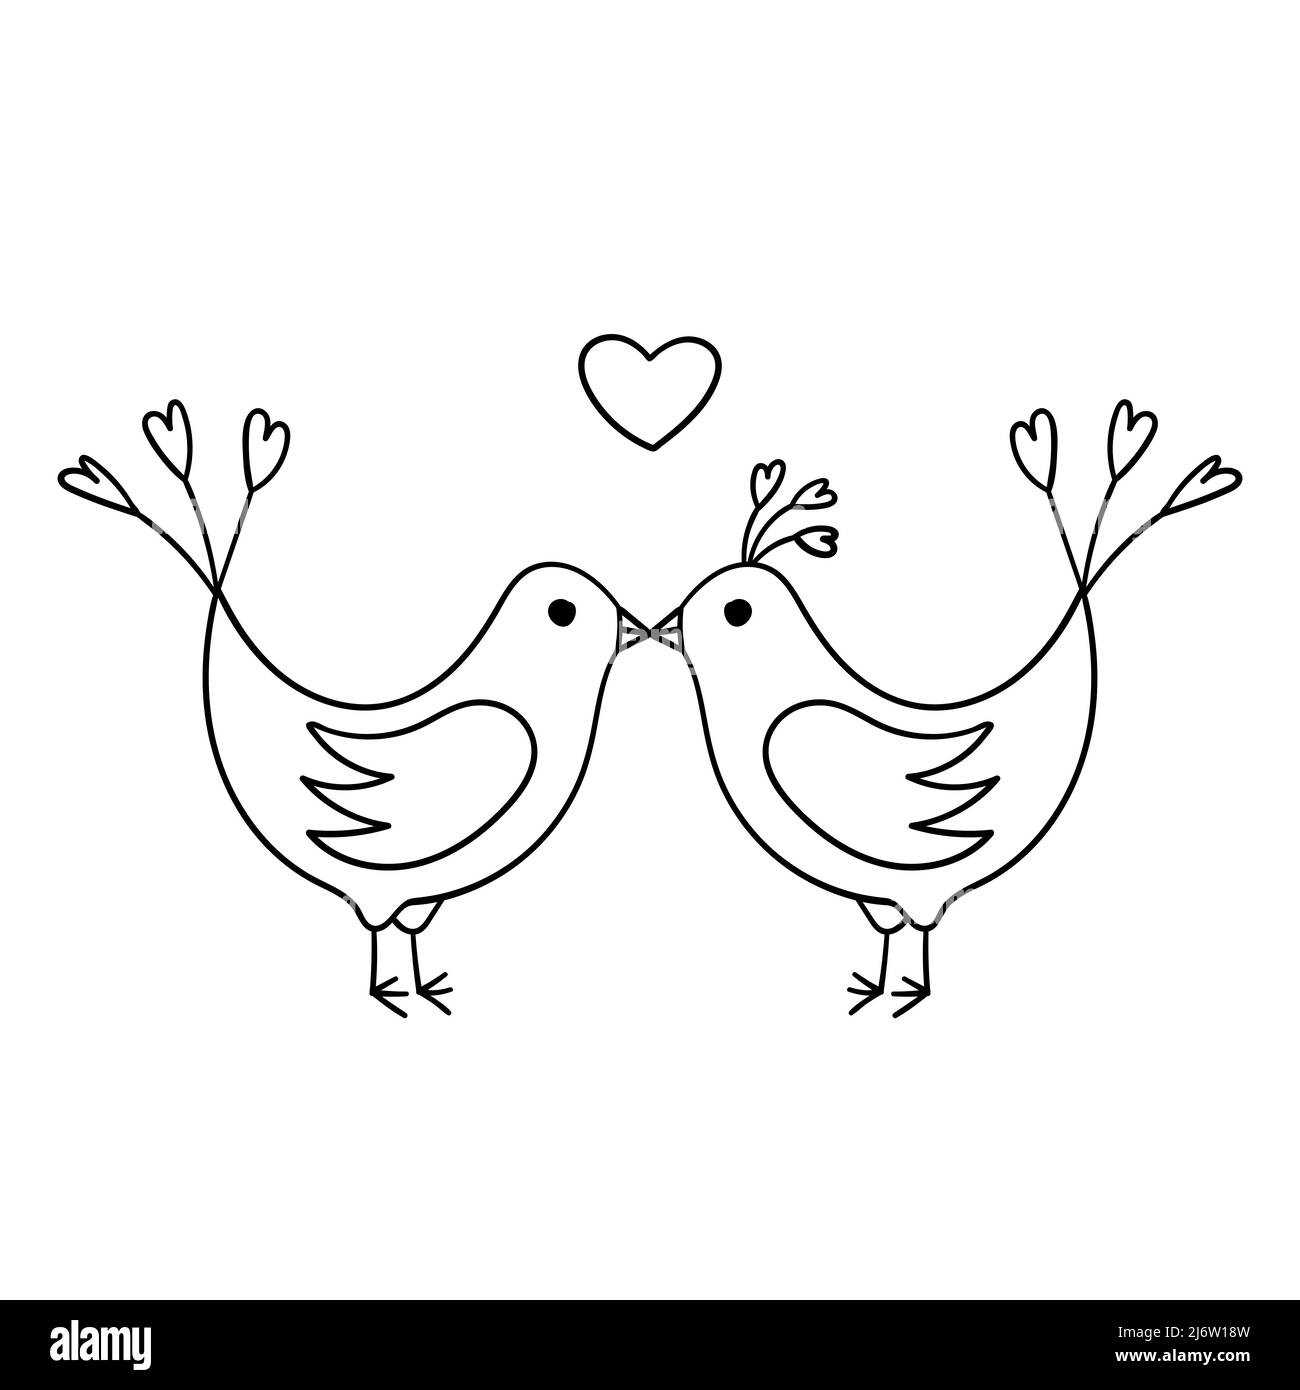 Lovebirds kiss. A couple of birds in love. Simple decorative design element. The outline illustration is hand-drawn, isolated on a white background. B Stock Vector